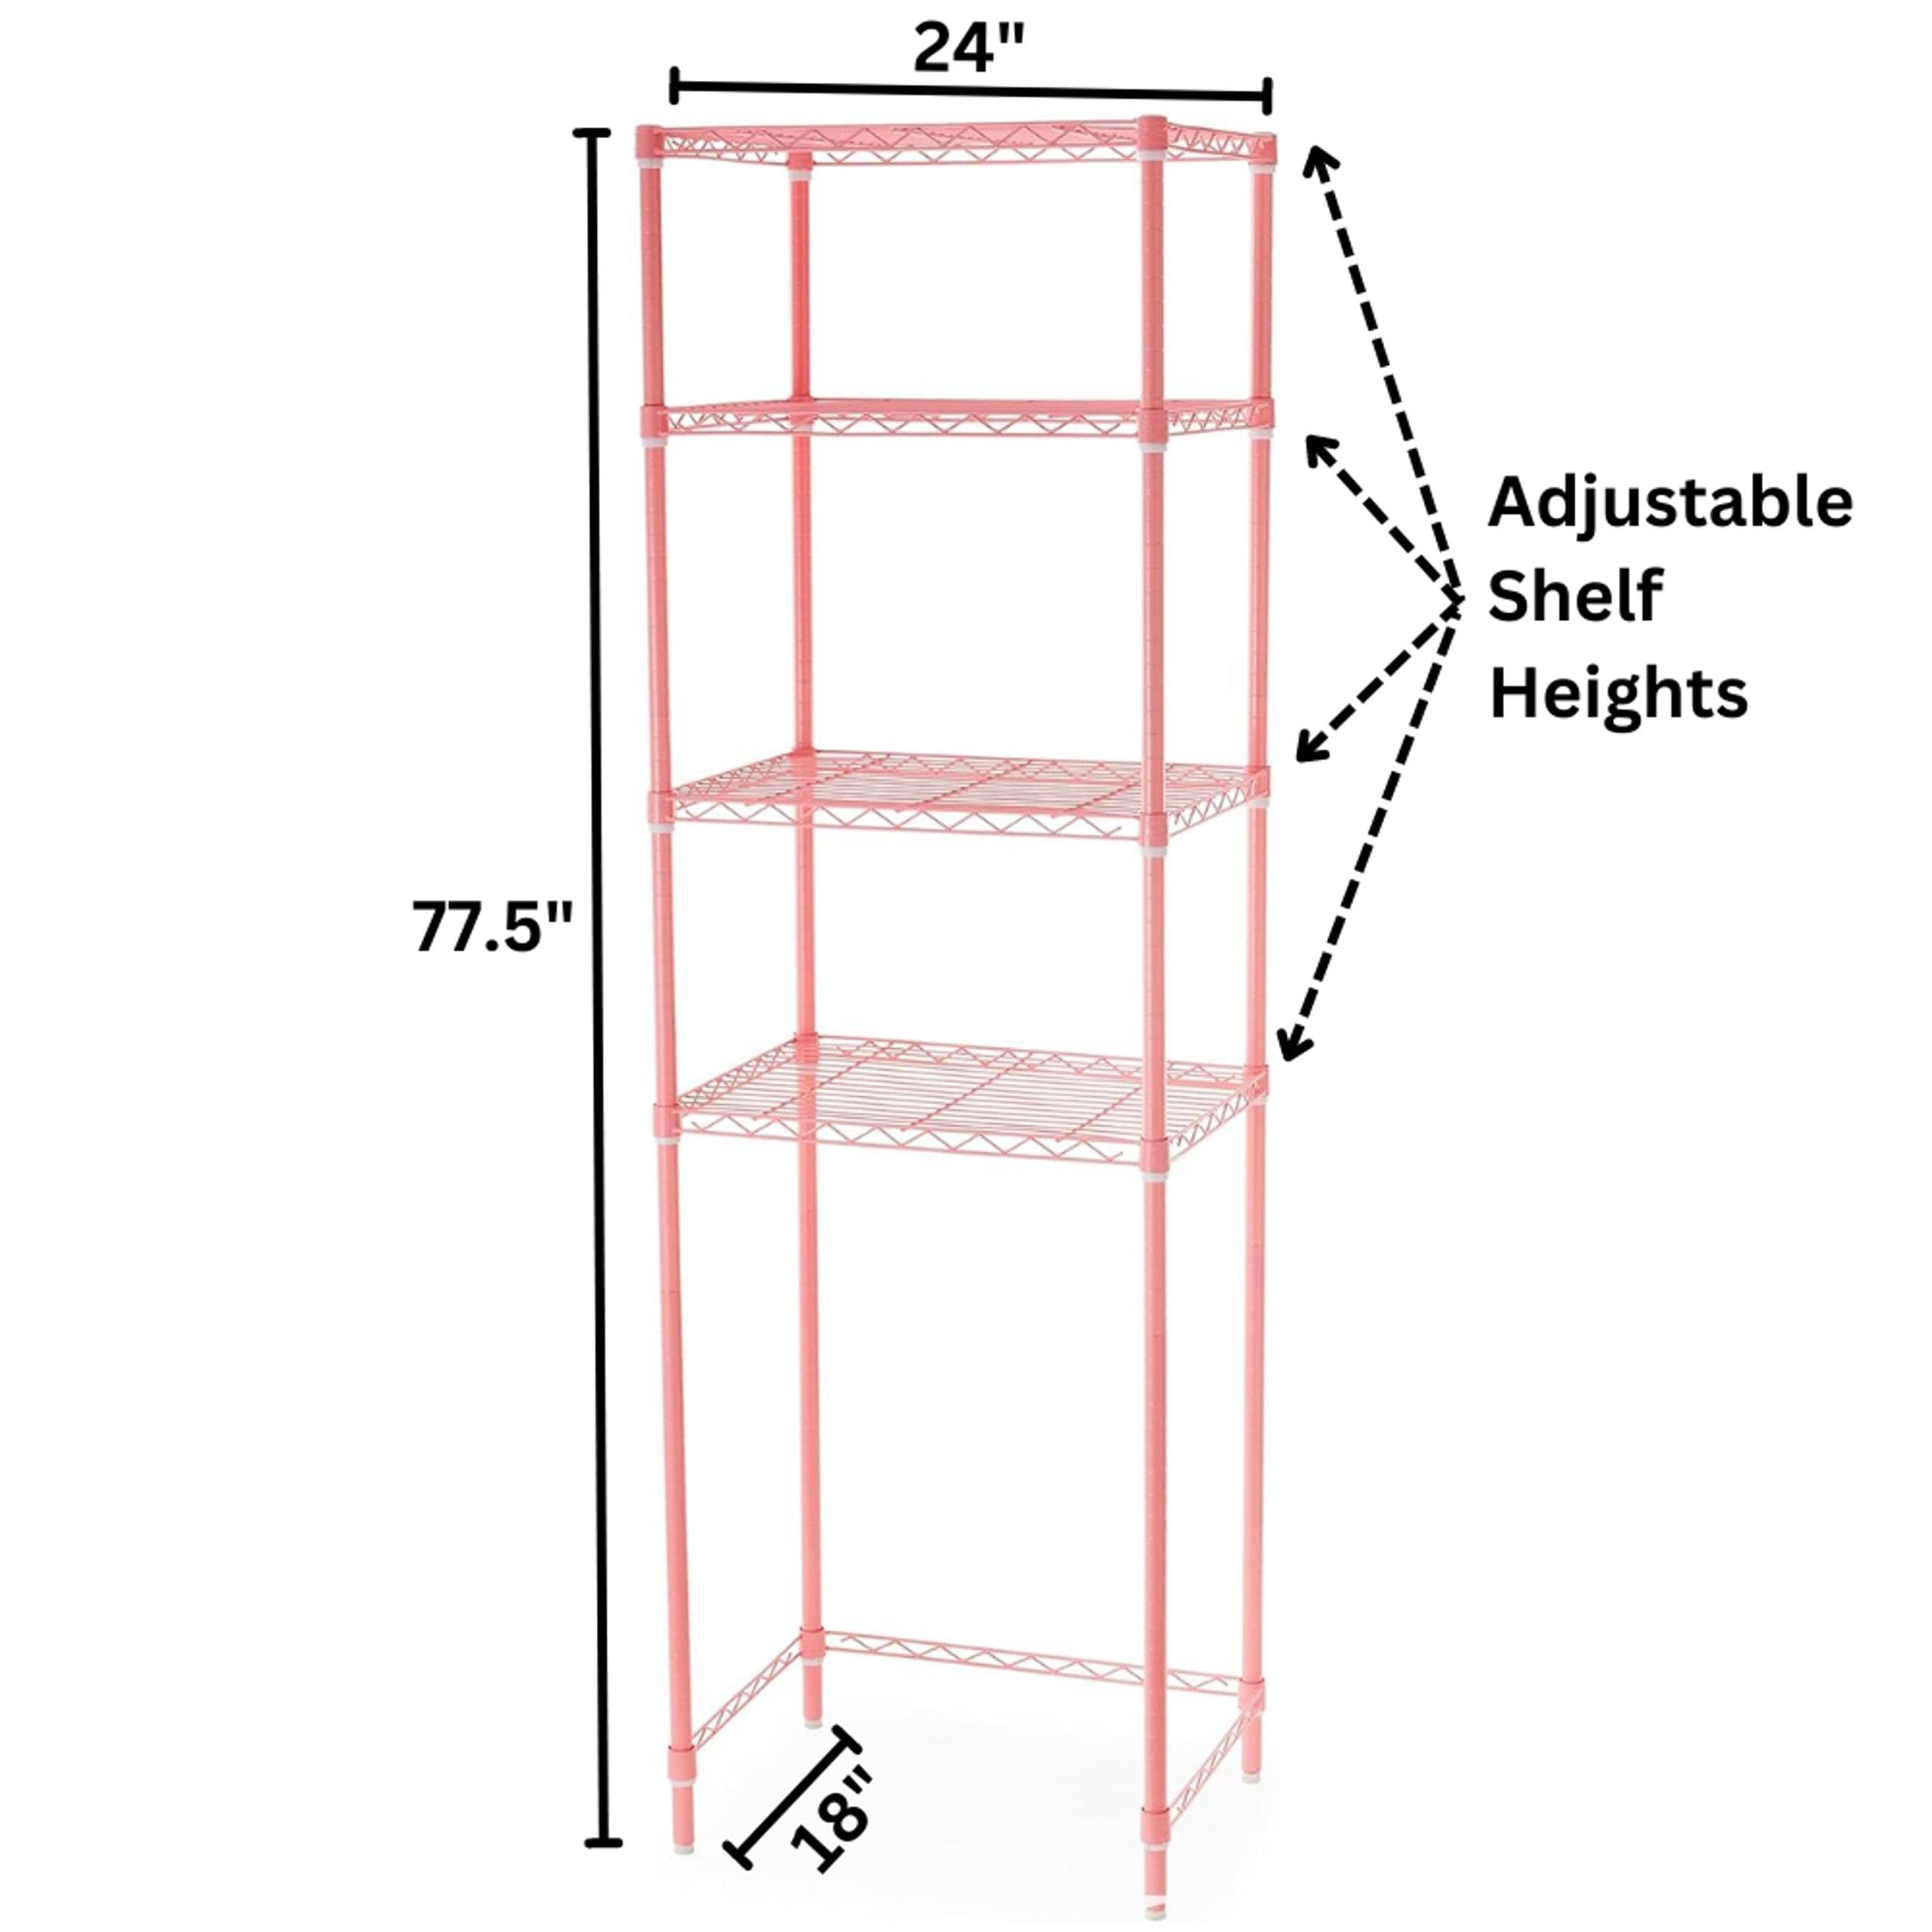 https://ak1.ostkcdn.com/images/products/is/images/direct/a754284cfeb9d06b8d354af83eff14b1f9e0c2db/Suprima-Extra-Height-Mini-Shelf-Supreme.jpg